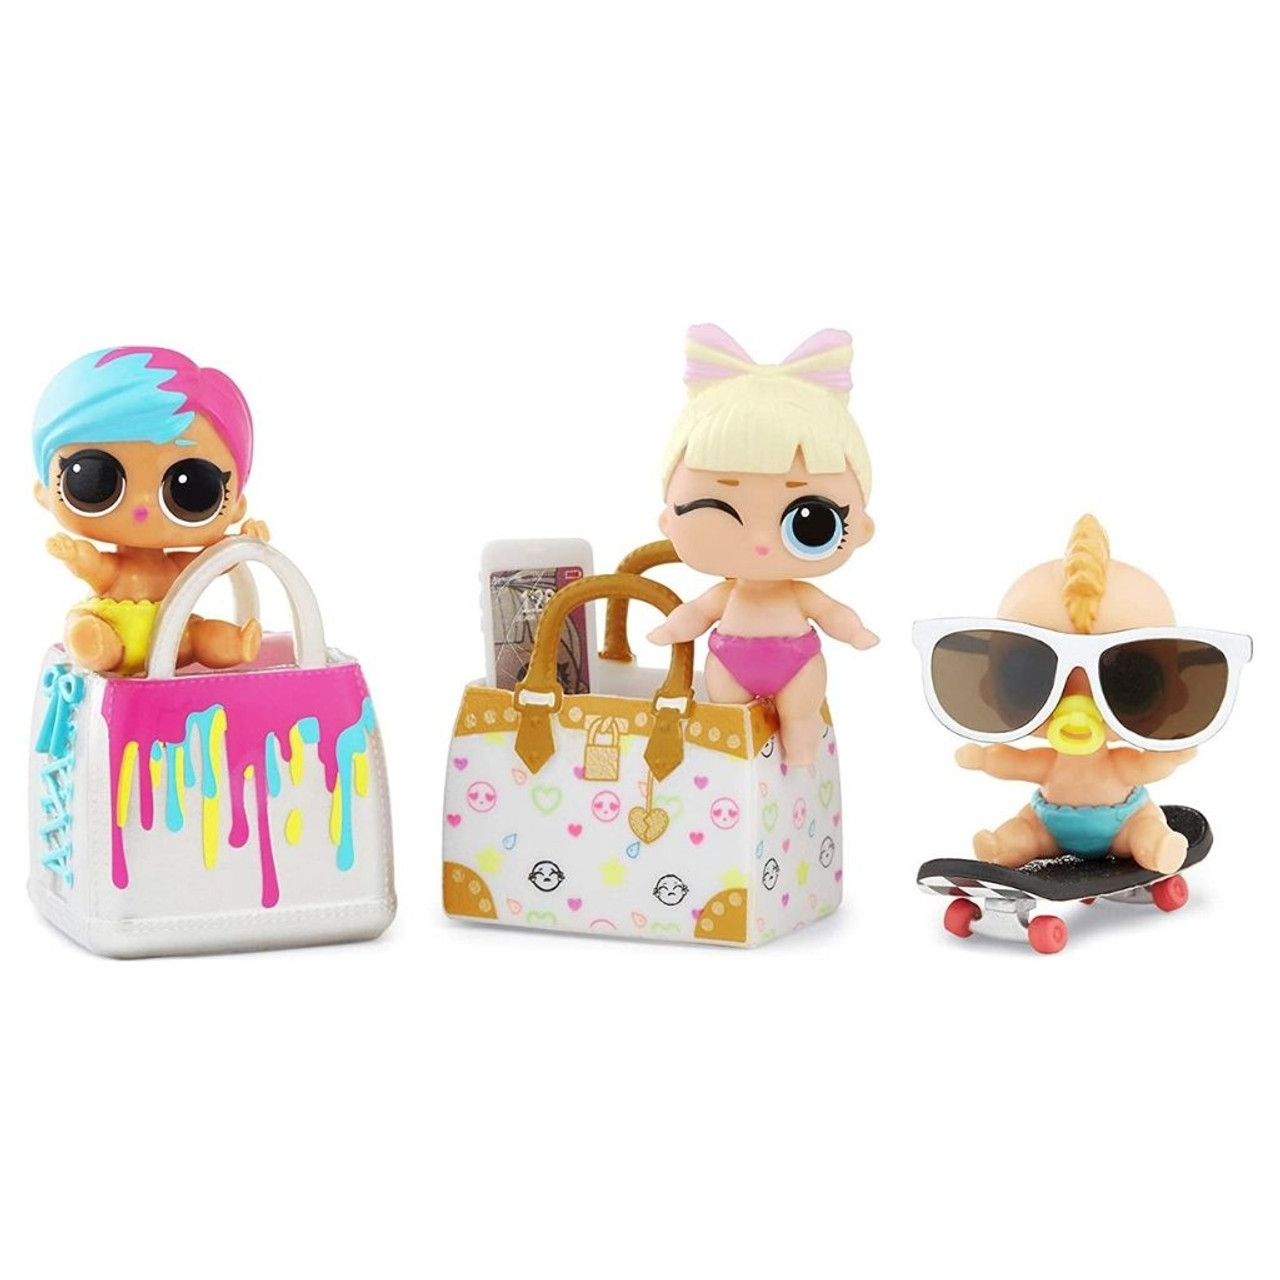 L.O.L. Surprise!™ Lil Sisters™ Eye Spy Series Collectible Toy (2-Pack) product image